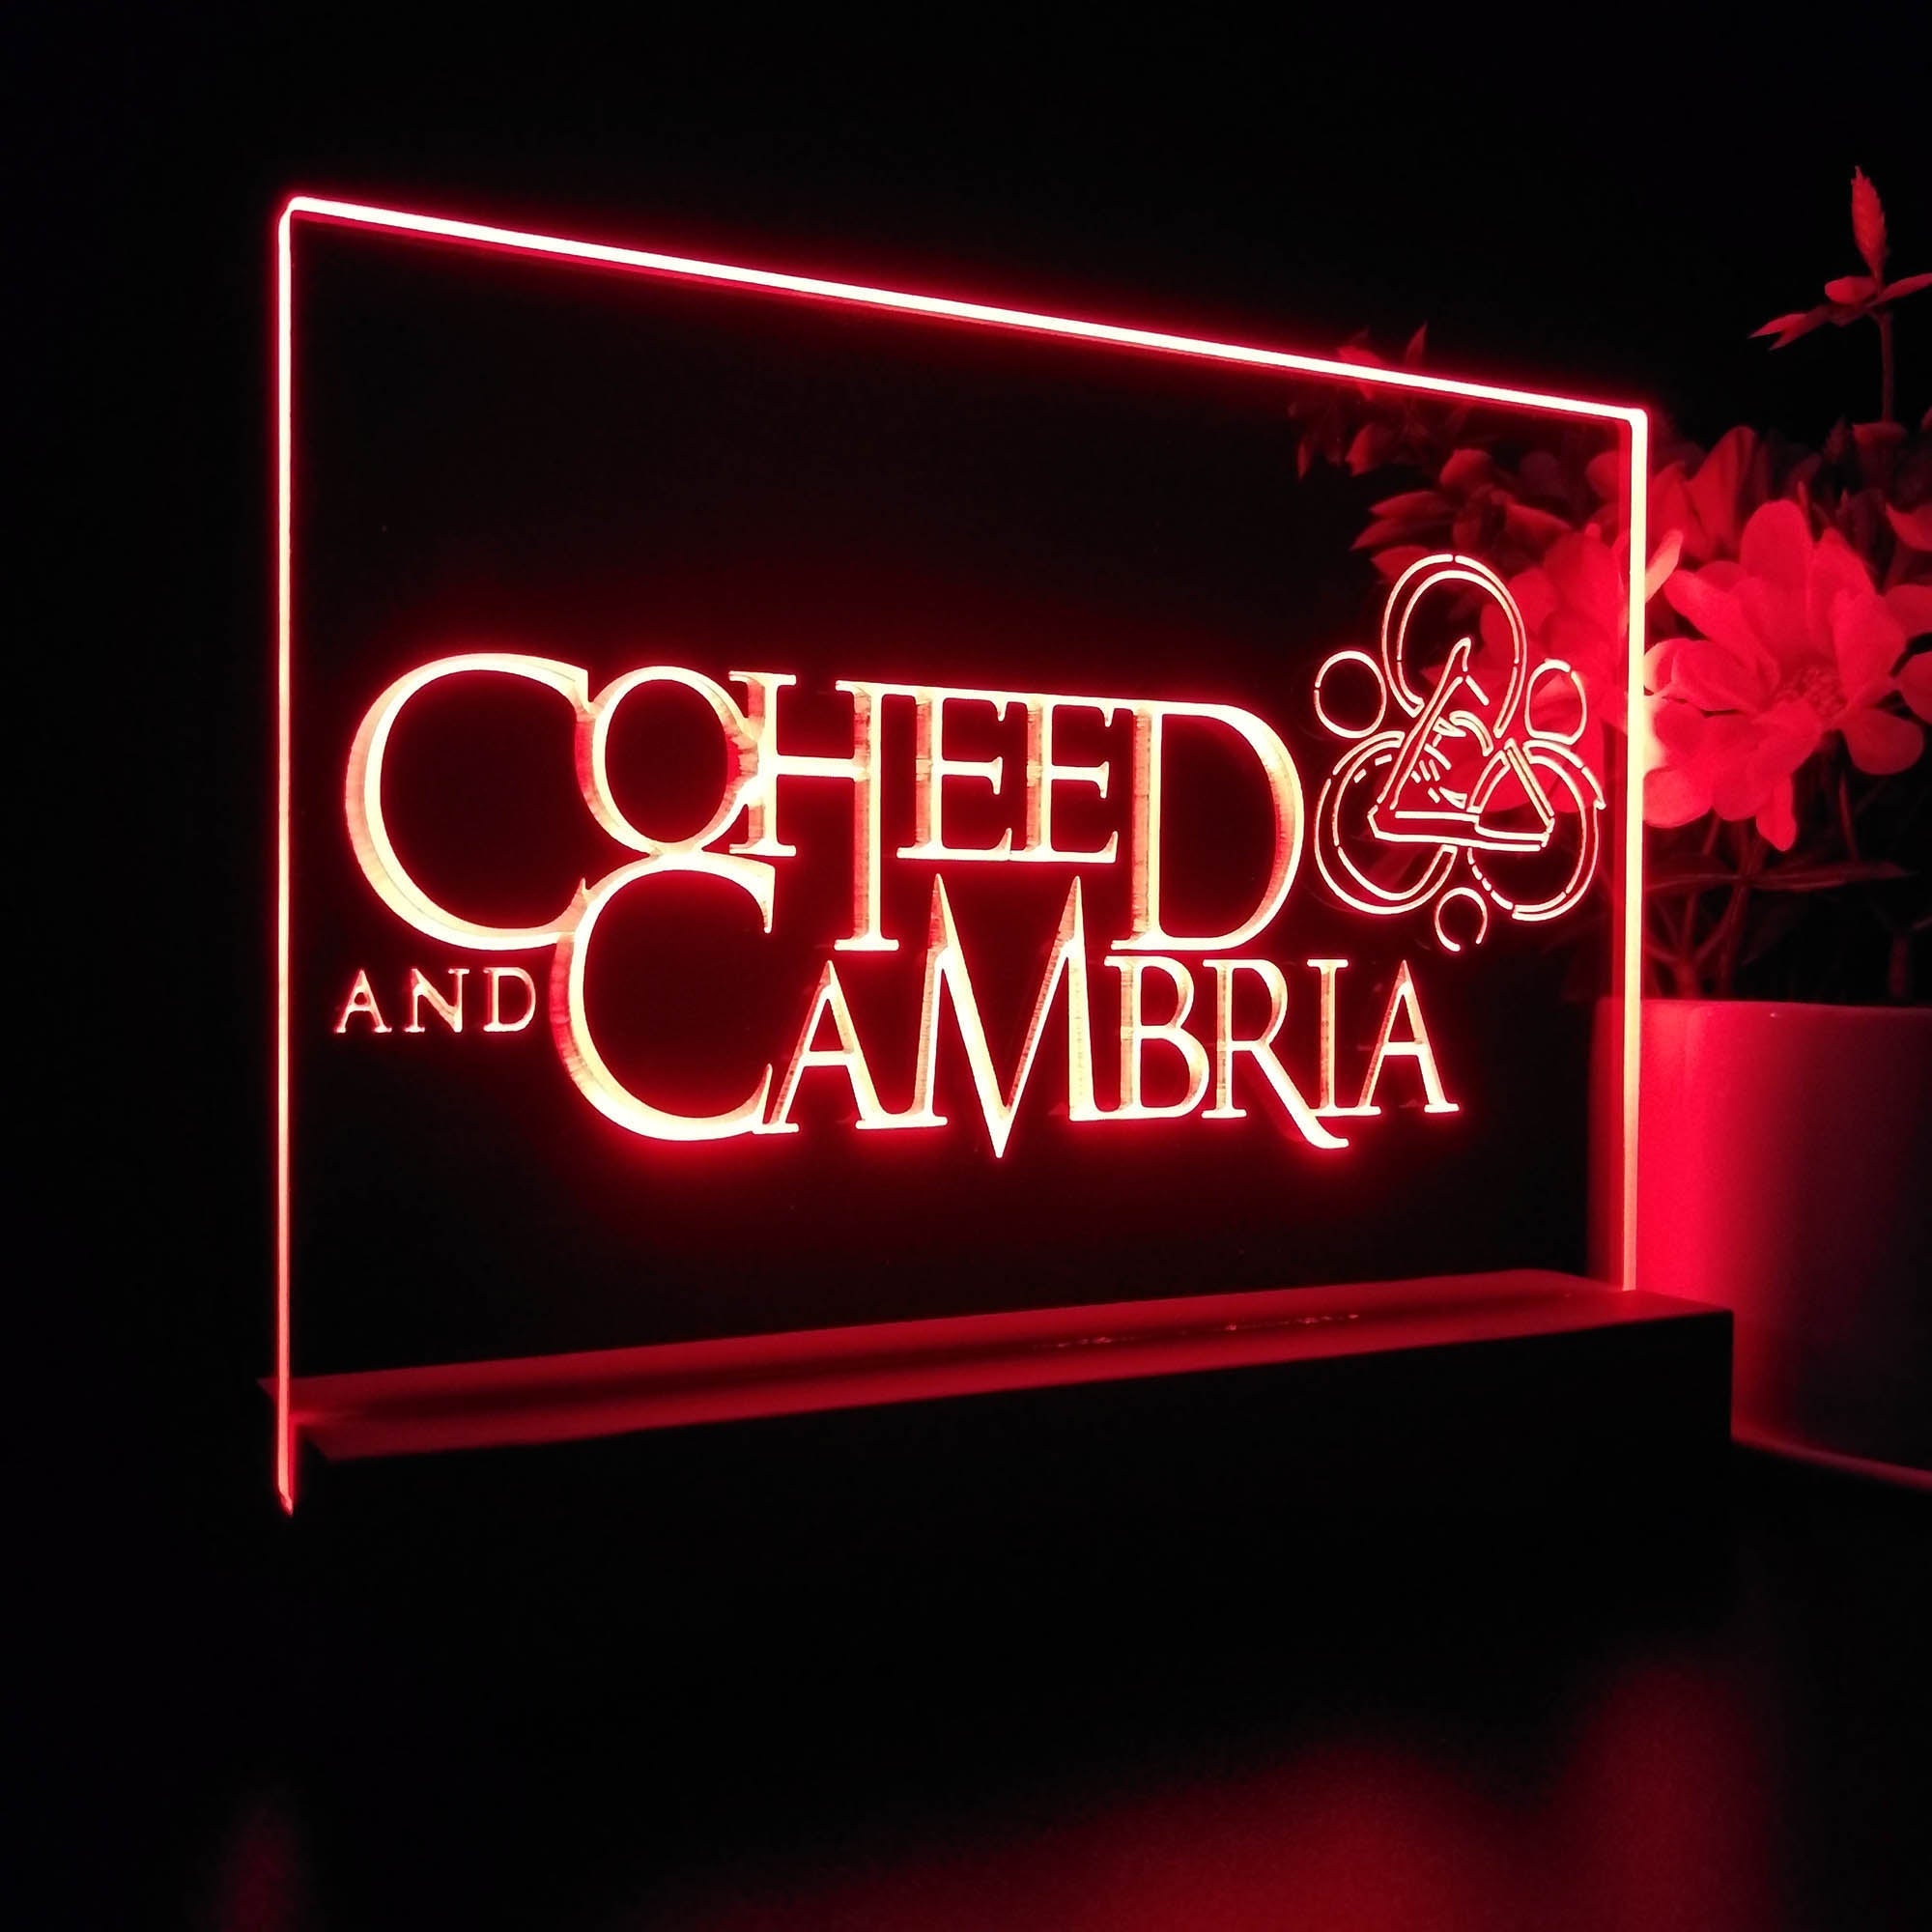 Coheed and Cambria Rock Band 3D Illusion Night Light Desk Lamp